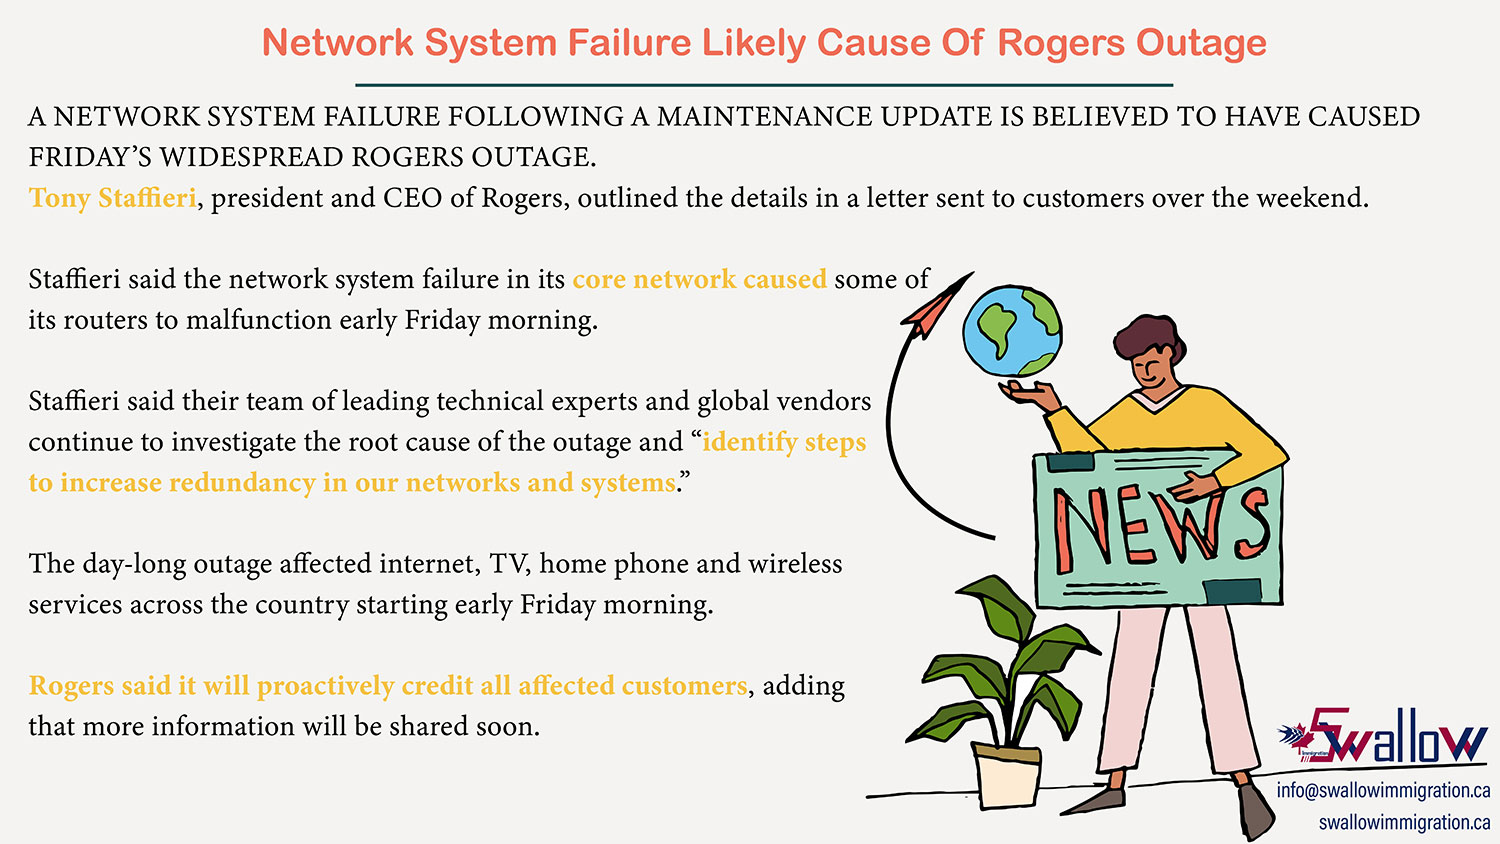 Network System Failure Likely Cause Of Rogers Outage